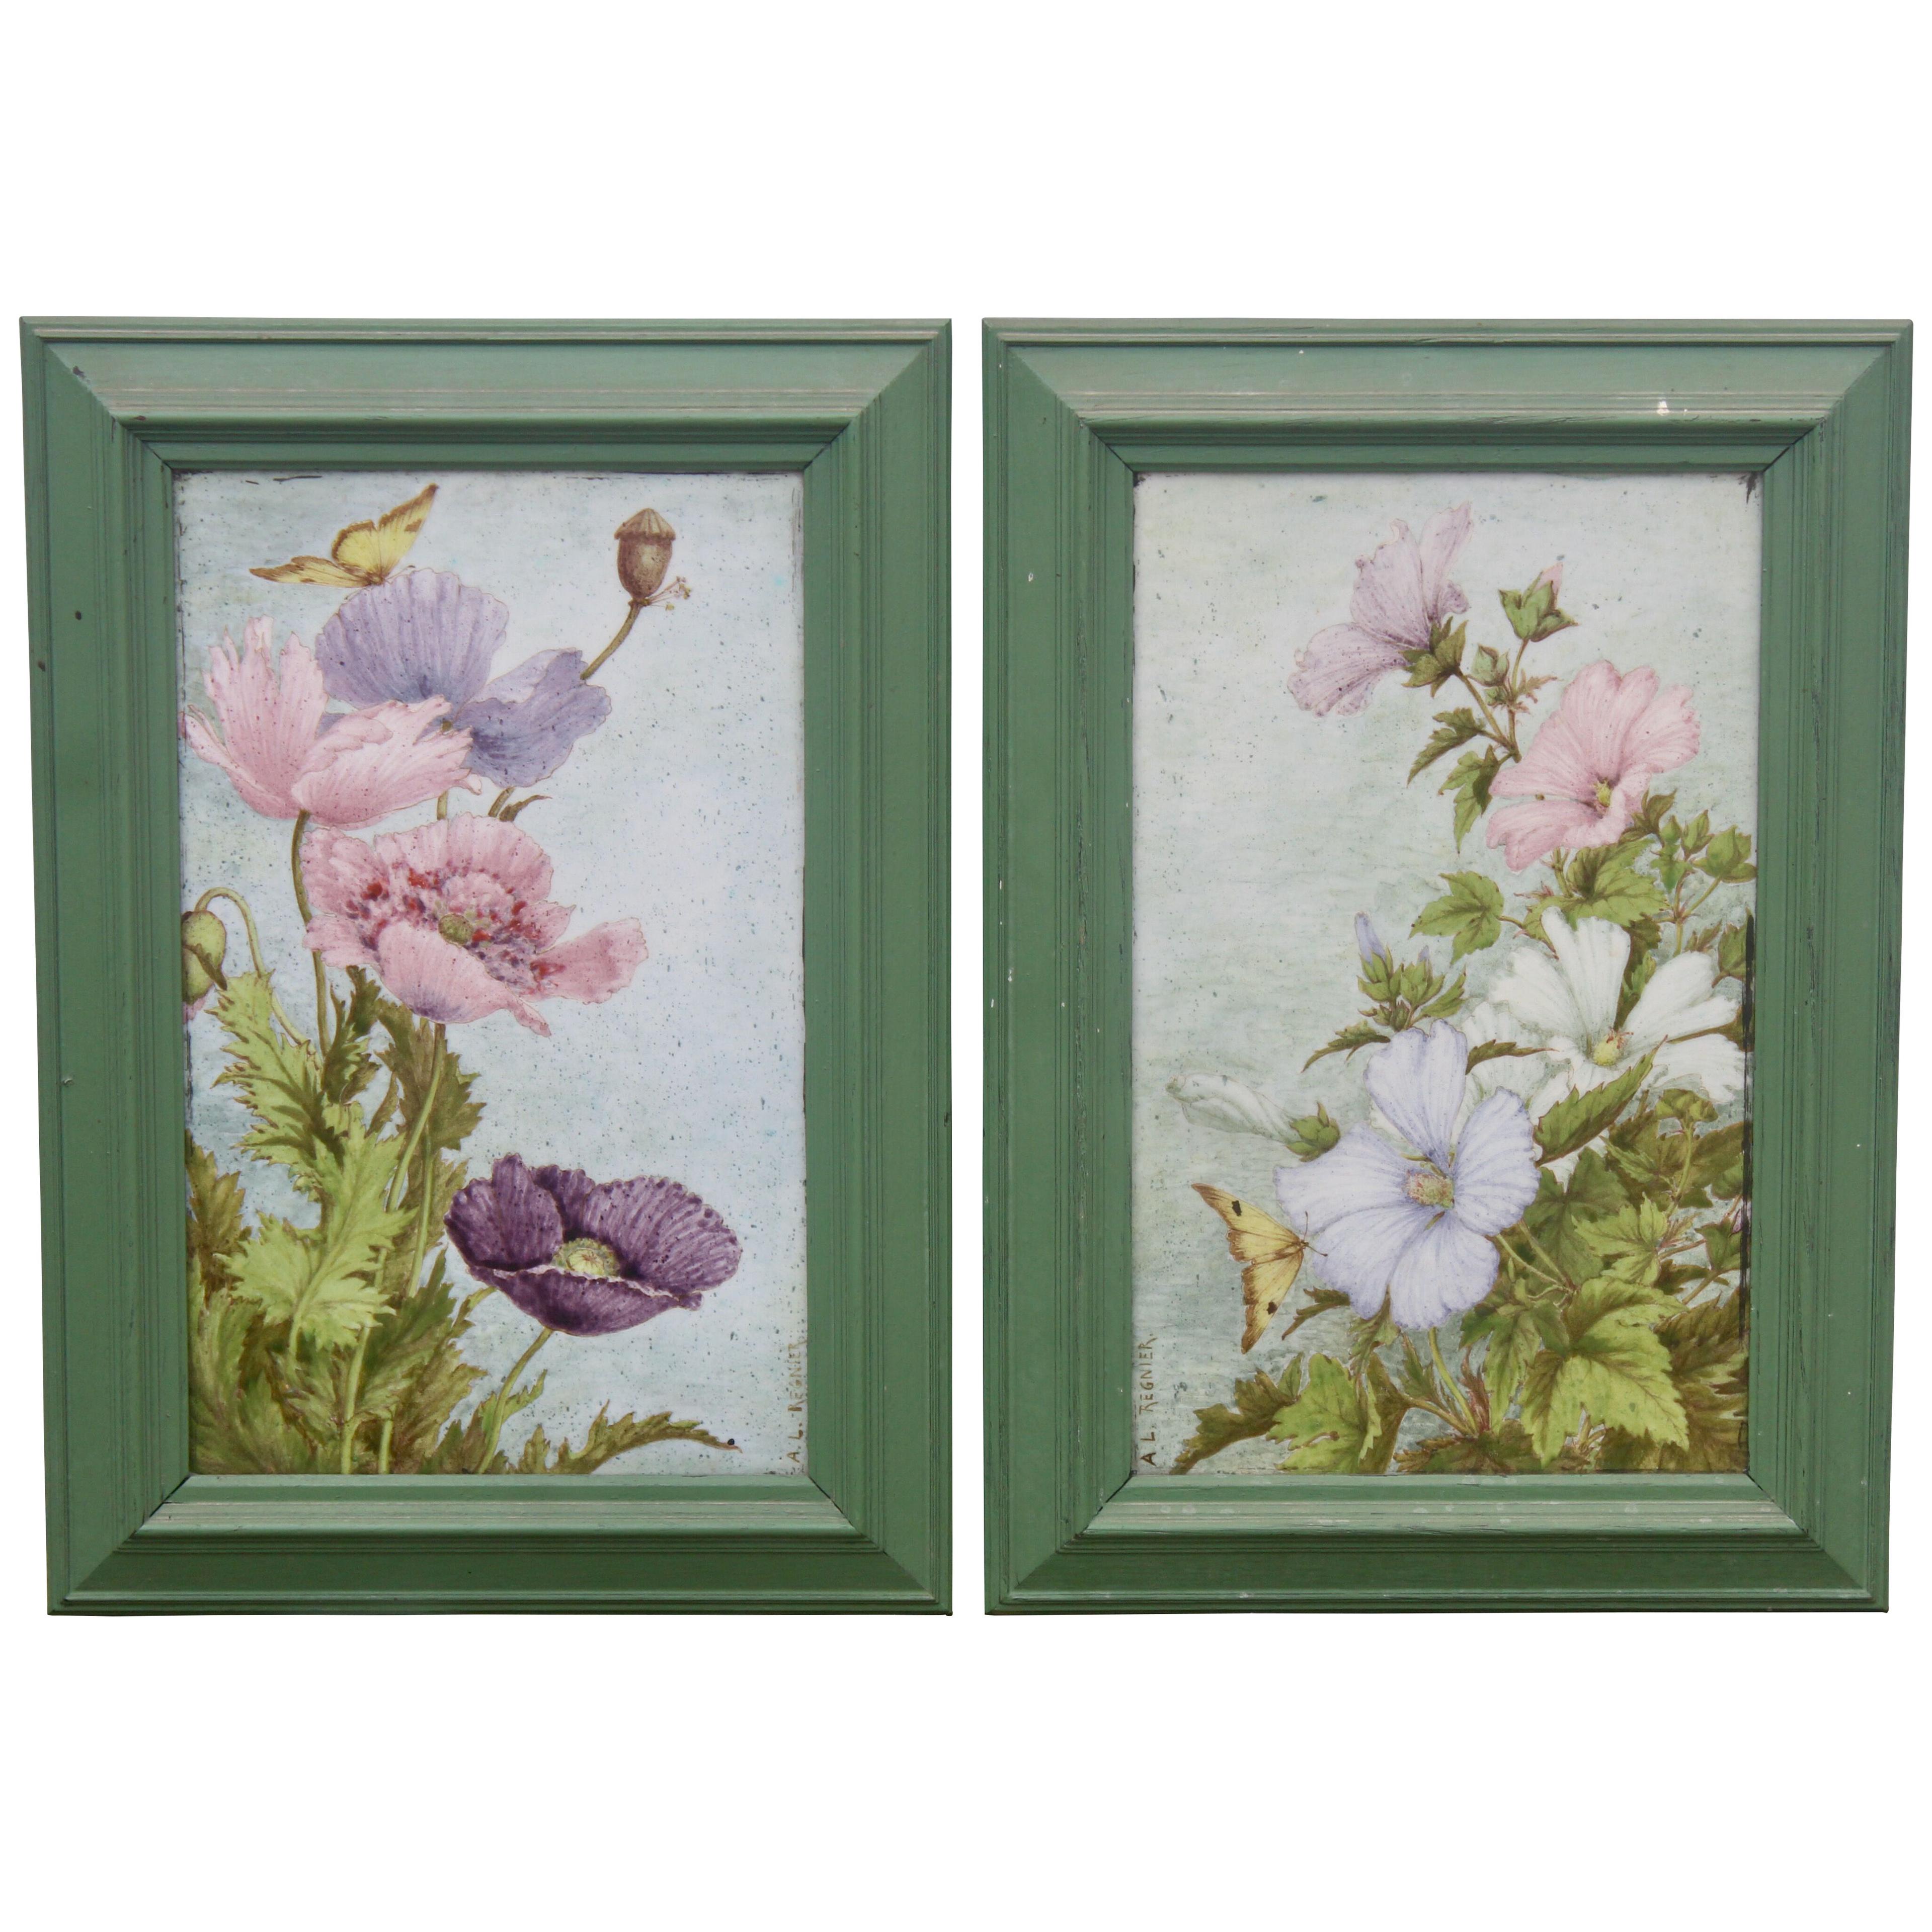 "Pavots" and "Lavateres" a Théodore Deck Pair of Framed Enameled Faïence Plaques